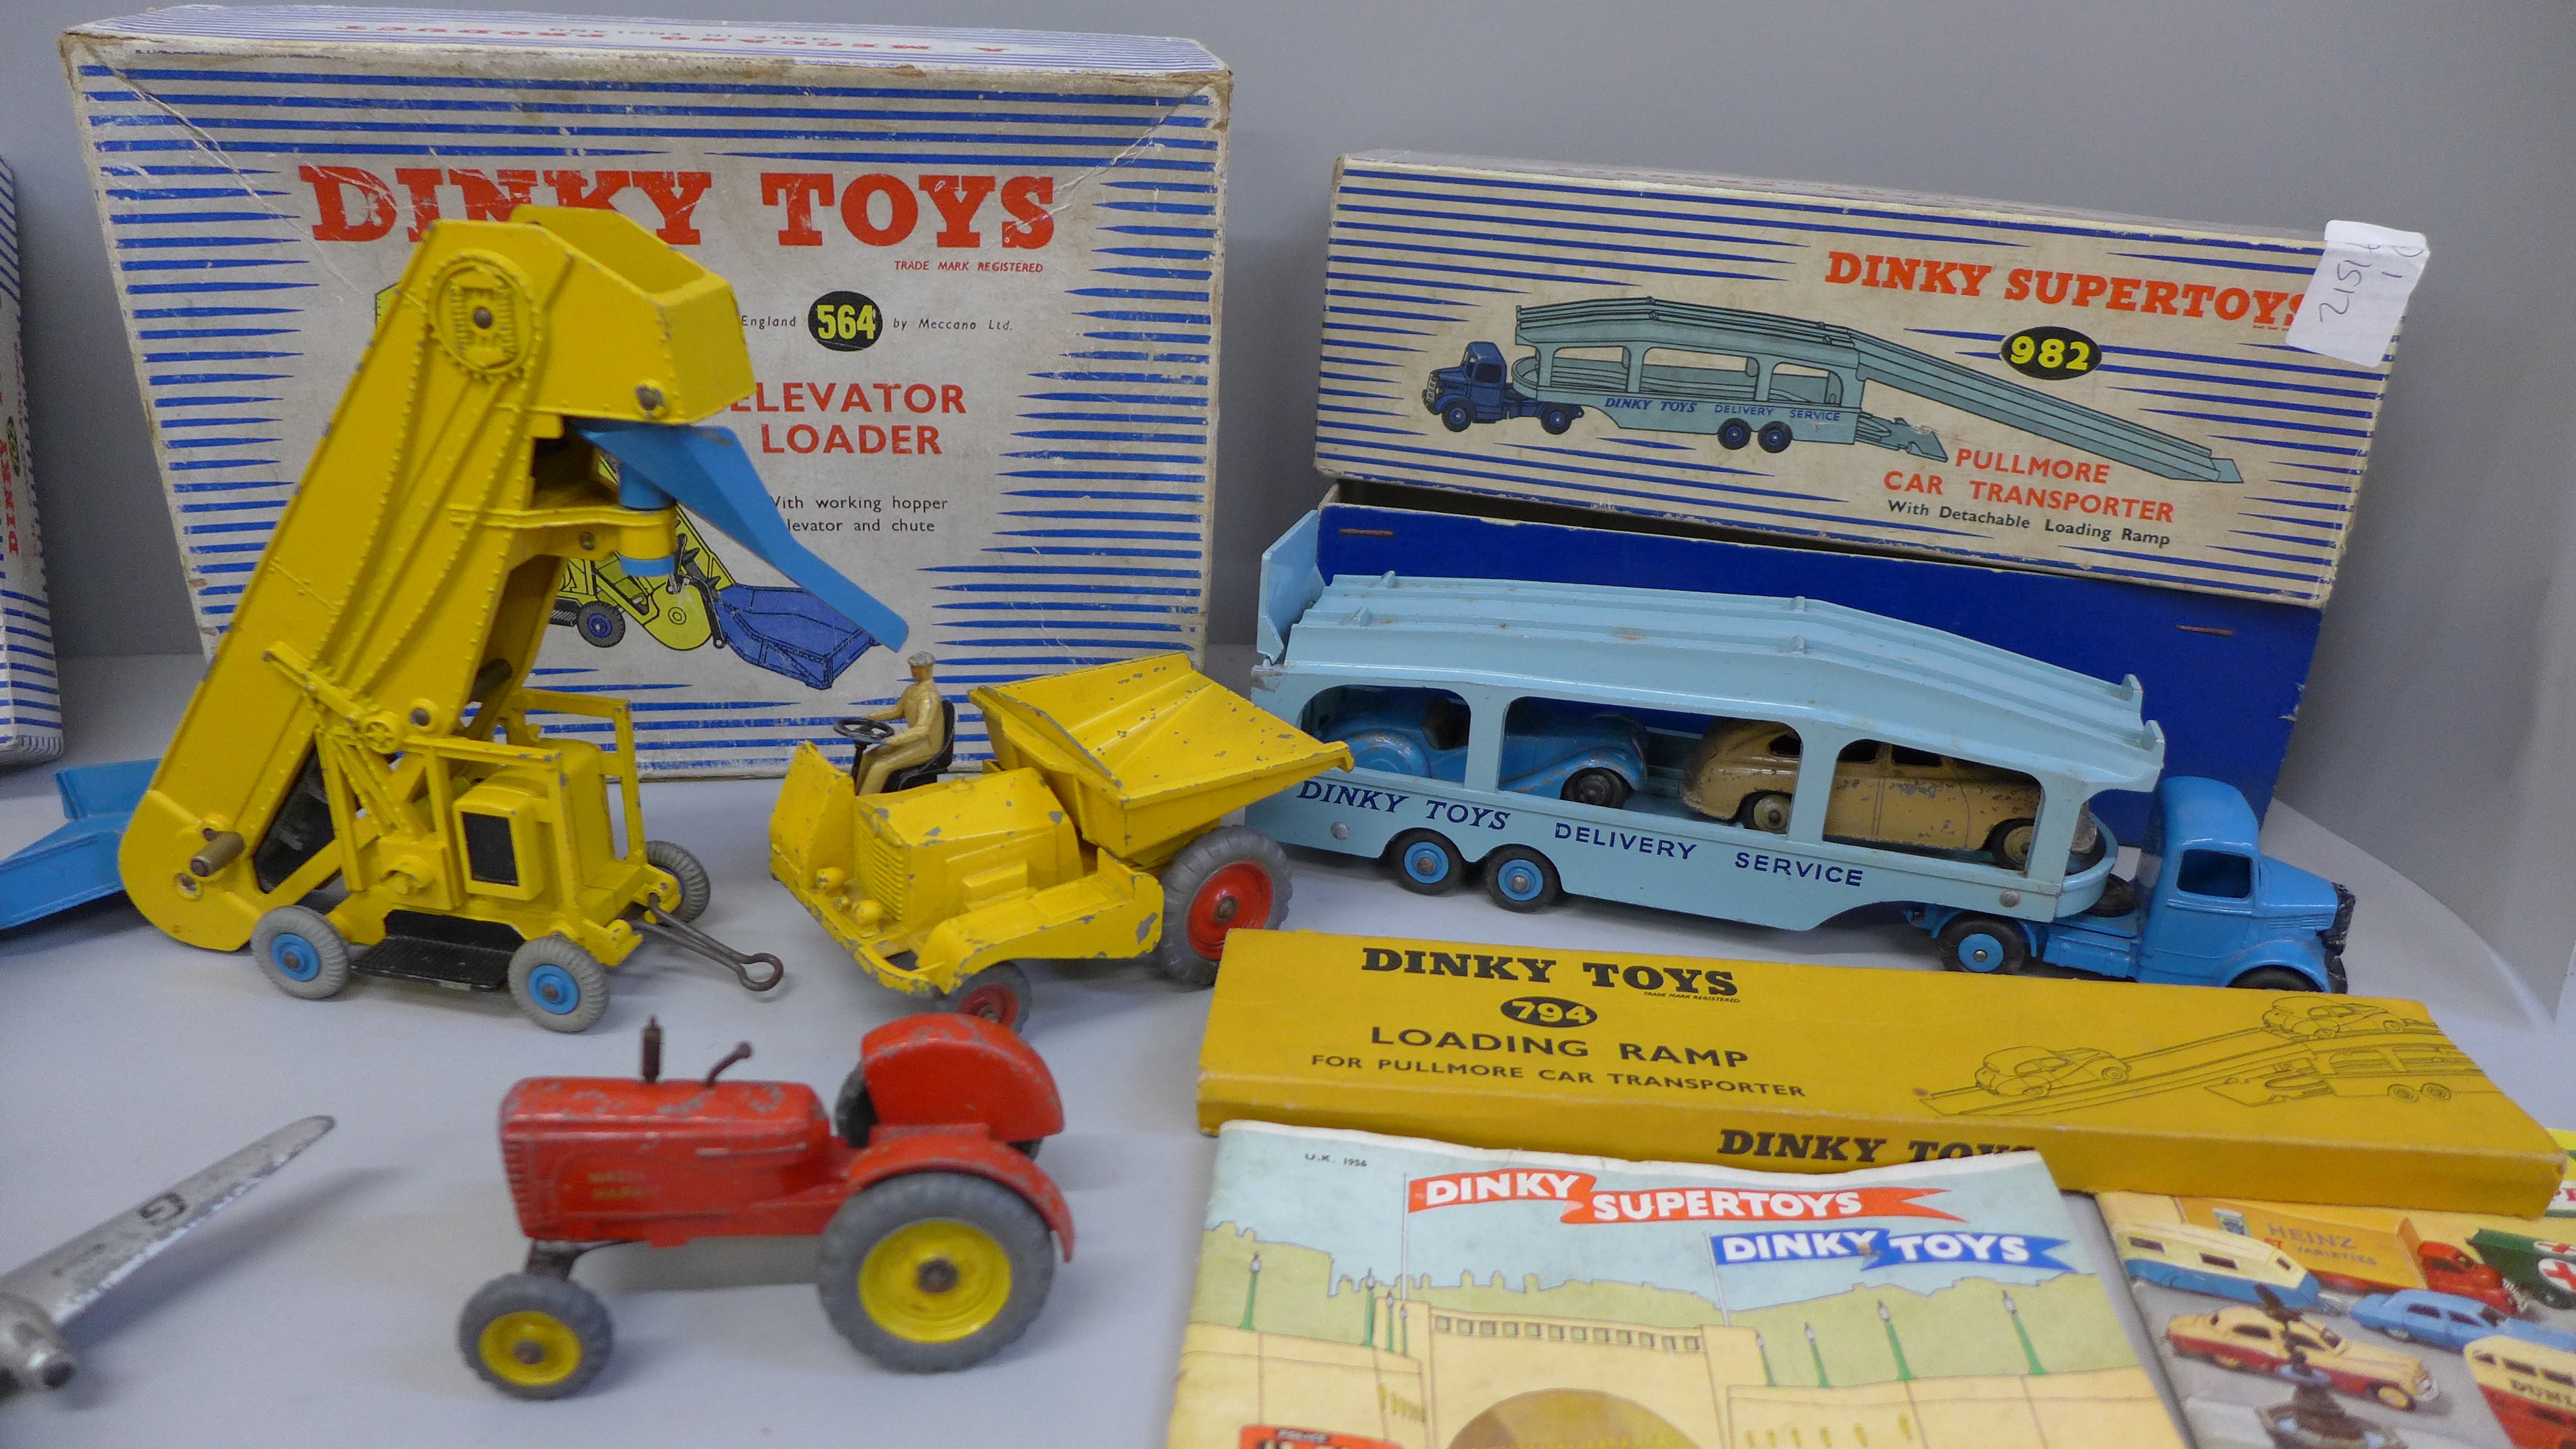 A boxed Dinky Toys 564 Elevator Loader, a boxed Dinky Toys 982 Pullmore Car Transporter and boxed - Image 2 of 3